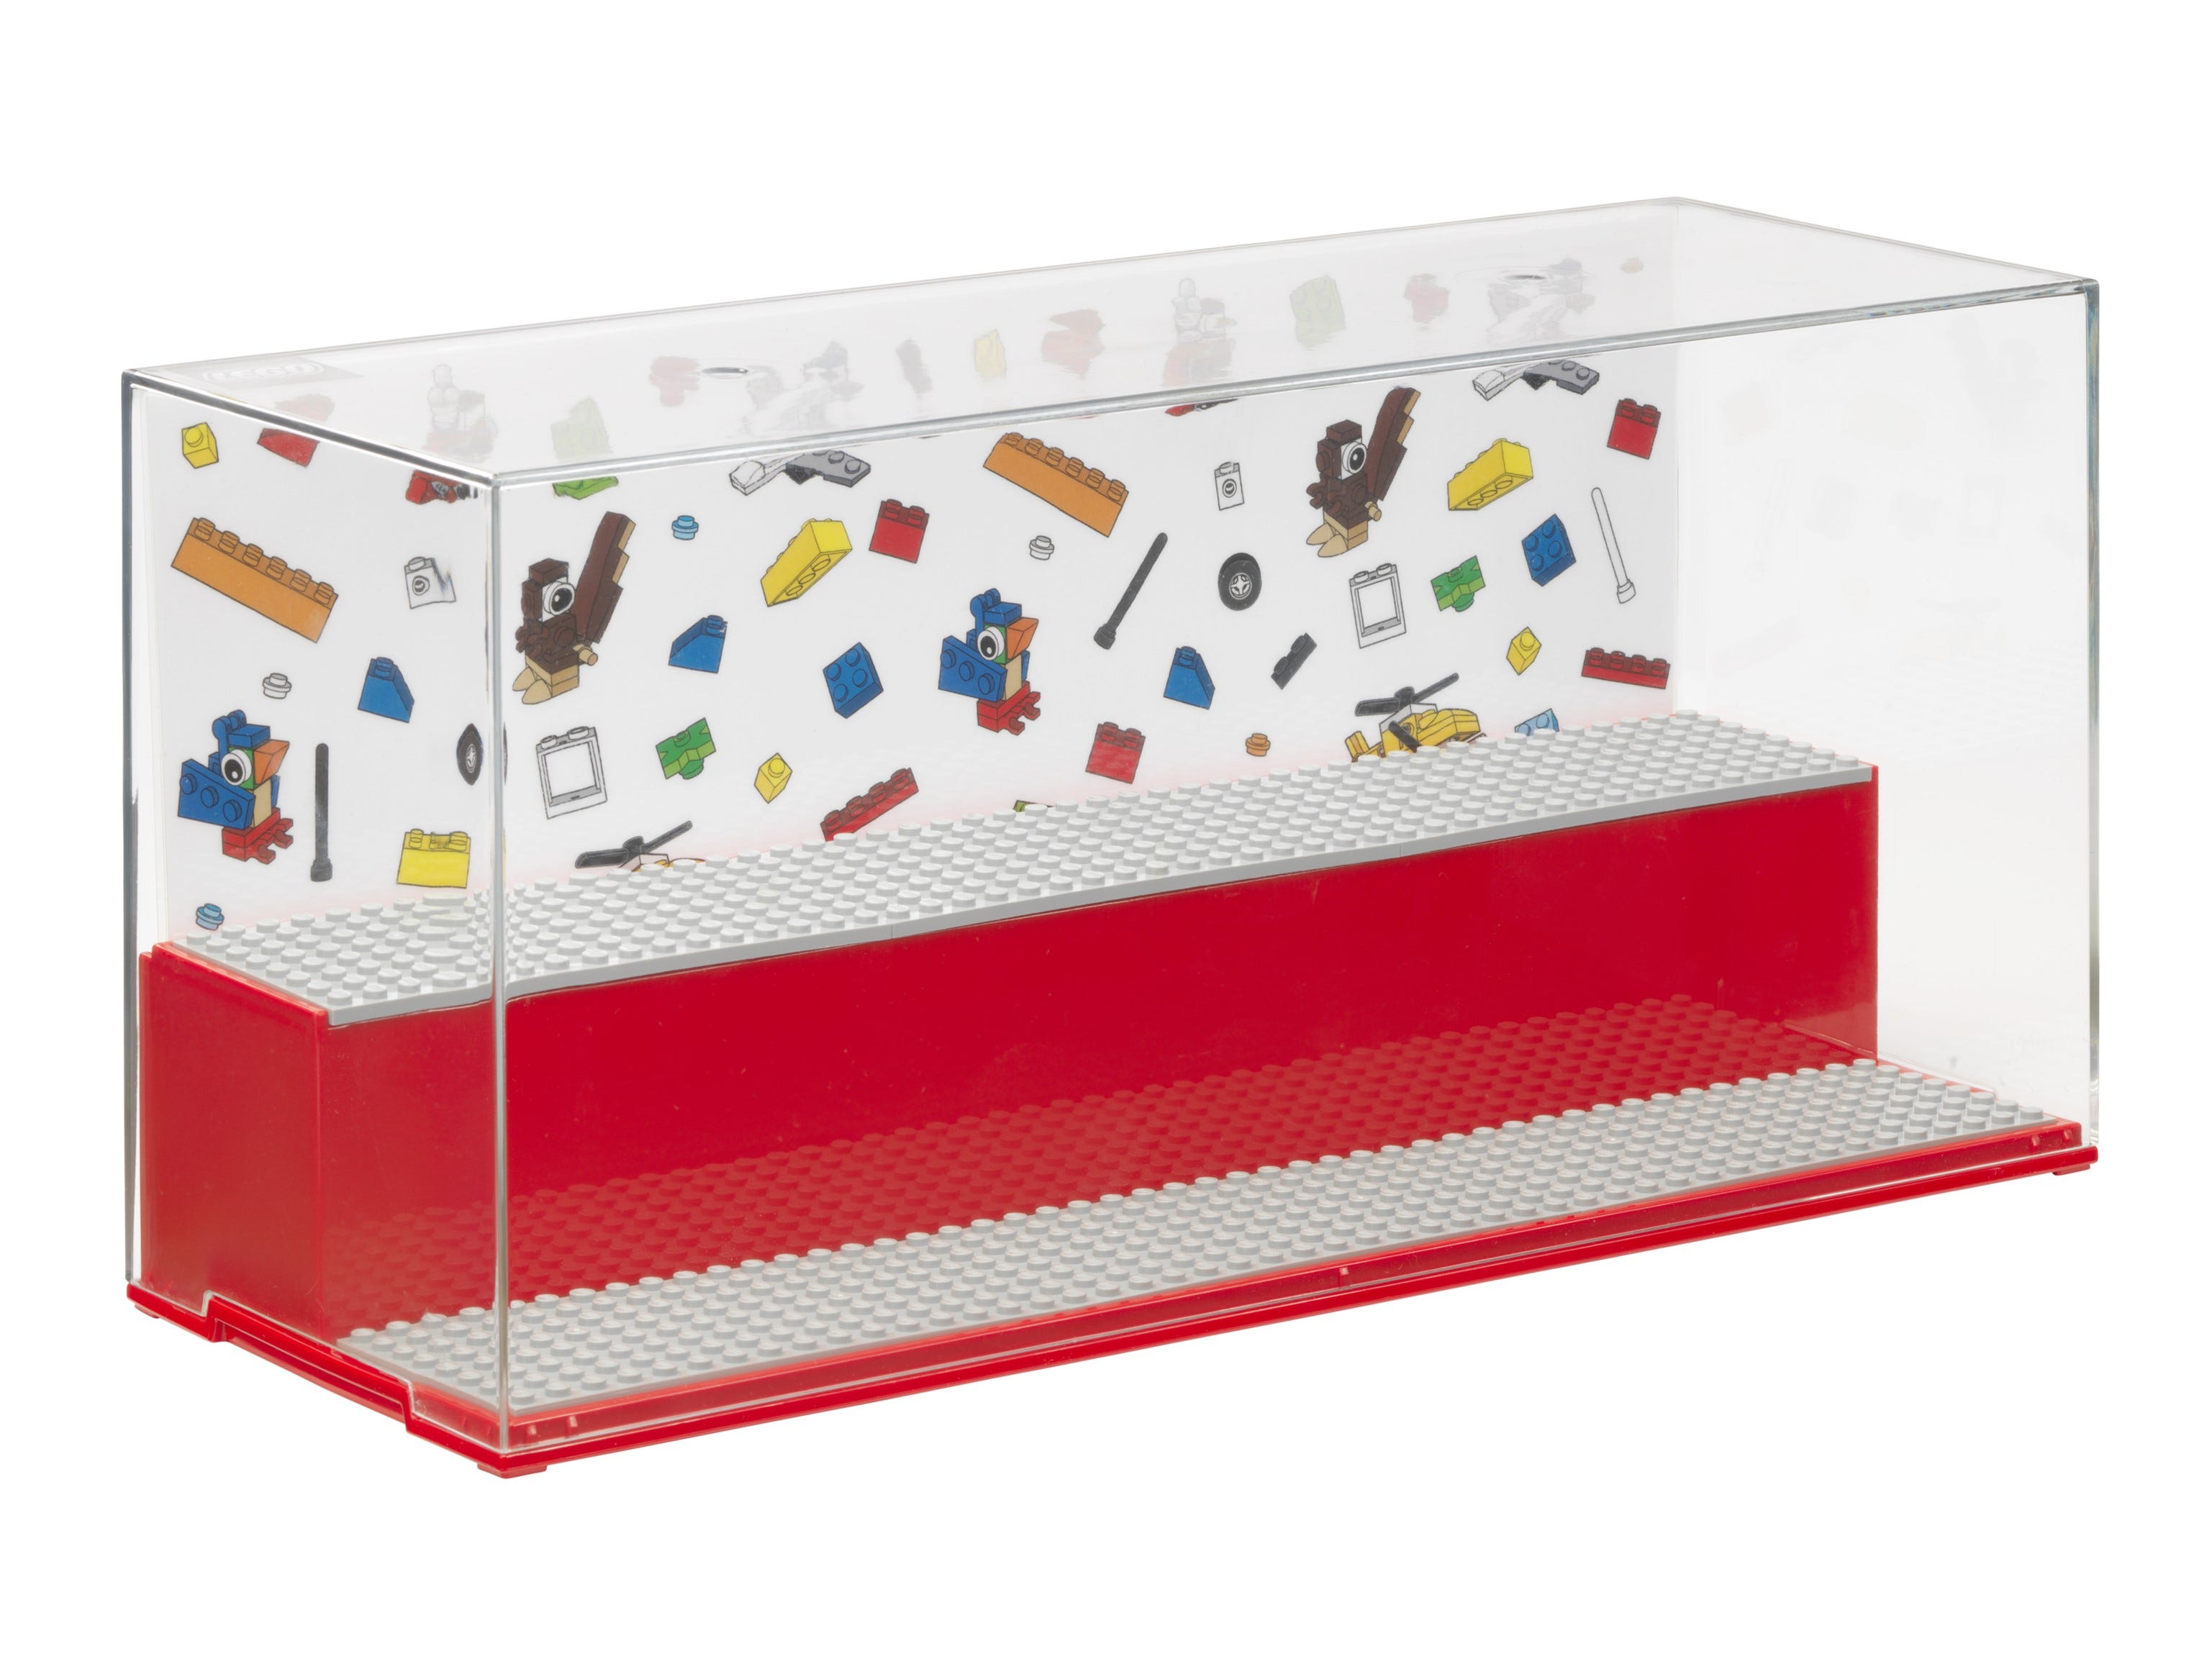 LEGO Play and Display Case Red